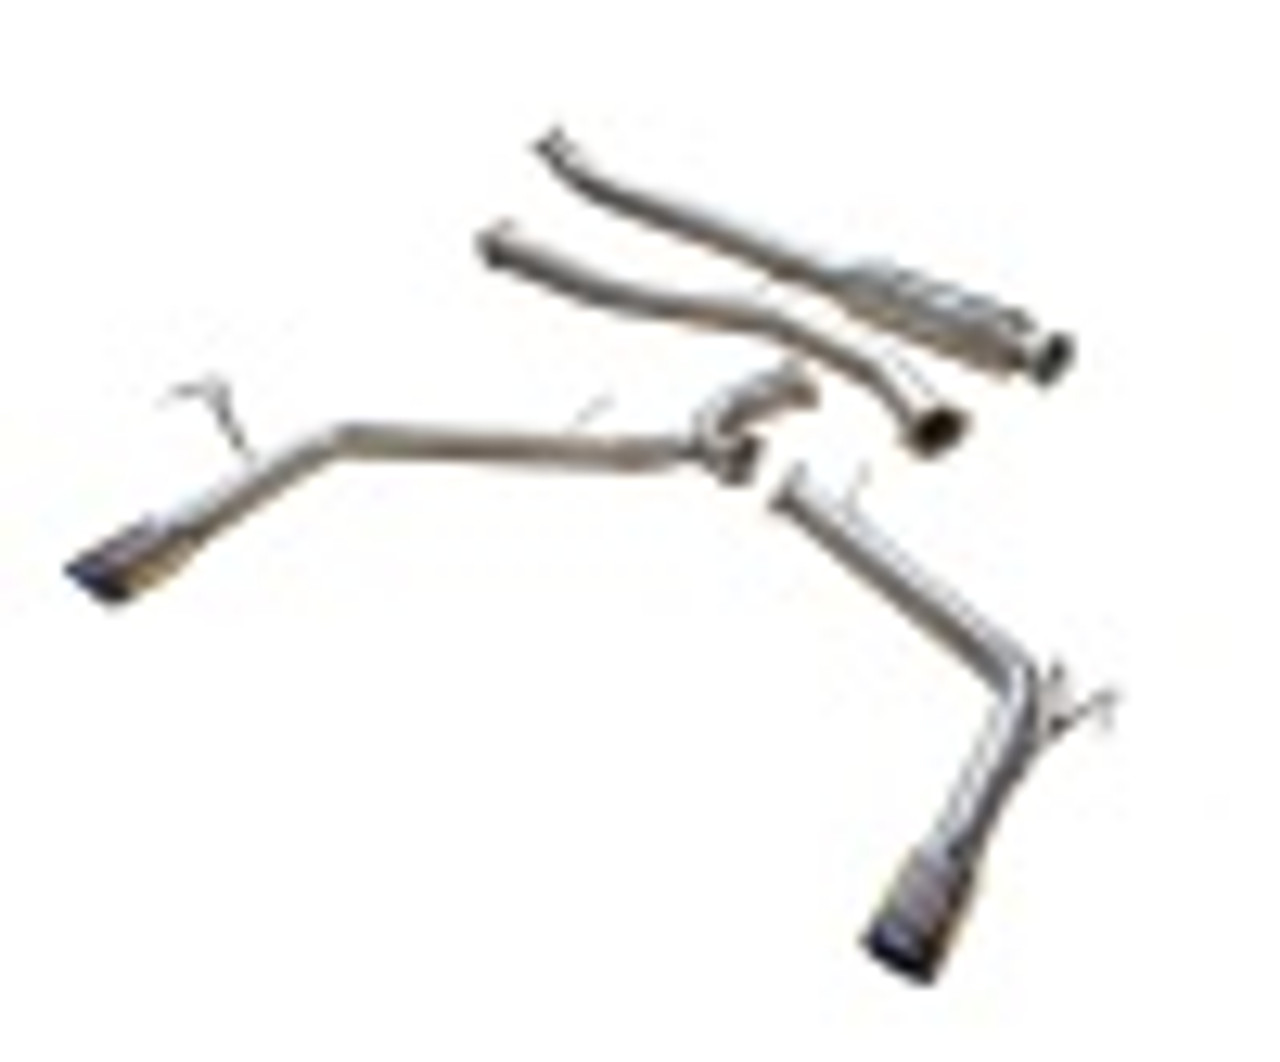 76mm Cat-back exhaust system with custom Y-pipe with Dual 3.5in. Titanium tips w/ Dual Burnt titanium tips
Finish: Polished